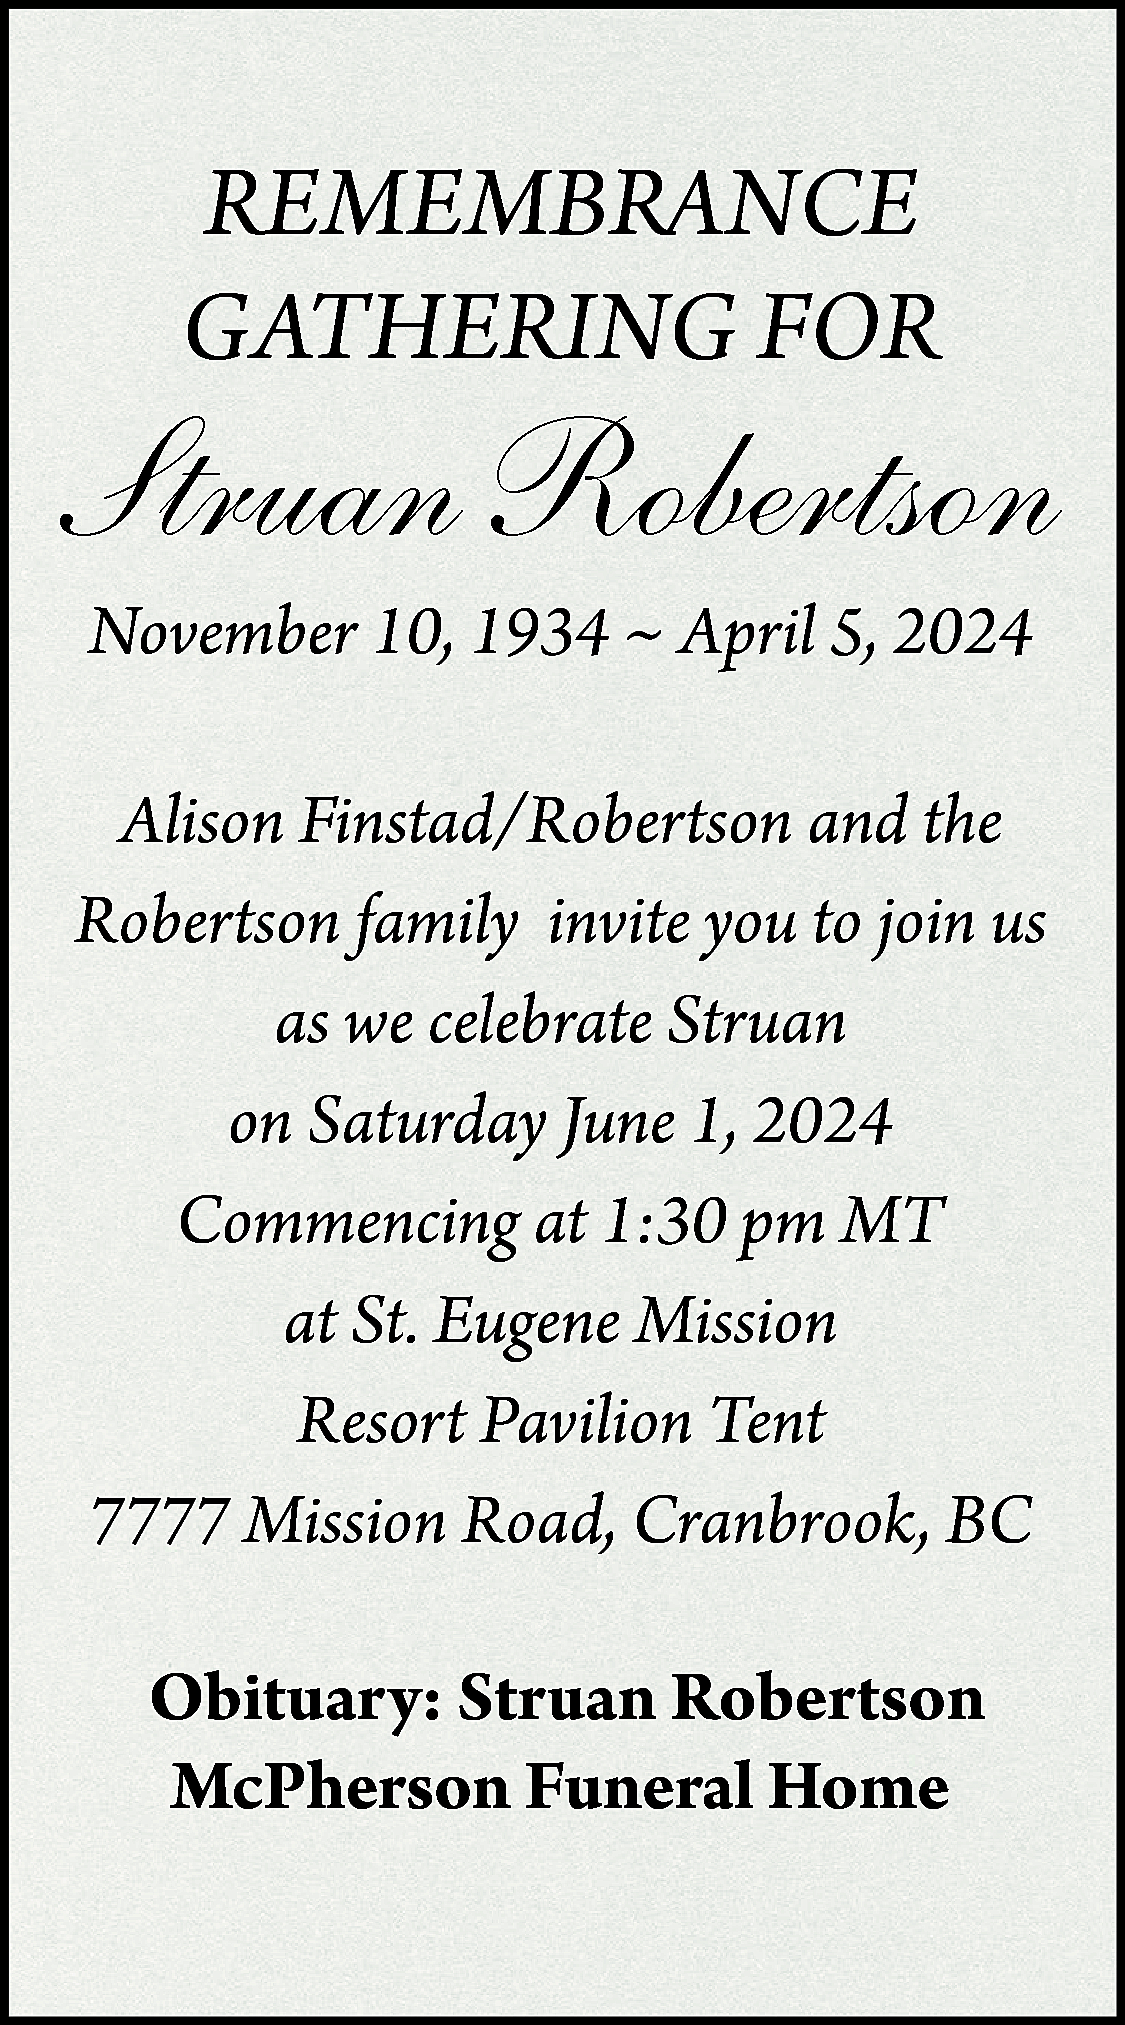 REMEMBRANCE <br>GATHERING FOR <br> <br>Struan  REMEMBRANCE  GATHERING FOR    Struan Robertson  November 10, 1934 ~ April 5, 2024    Alison Finstad/Robertson and the  Robertson family invite you to join us  as we celebrate Struan  on Saturday June 1, 2024  Commencing at 1:30 pm MT  at St. Eugene Mission  Resort Pavilion Tent  7777 Mission Road, Cranbrook, BC  Obituary: Struan Robertson  McPherson Funeral Home    